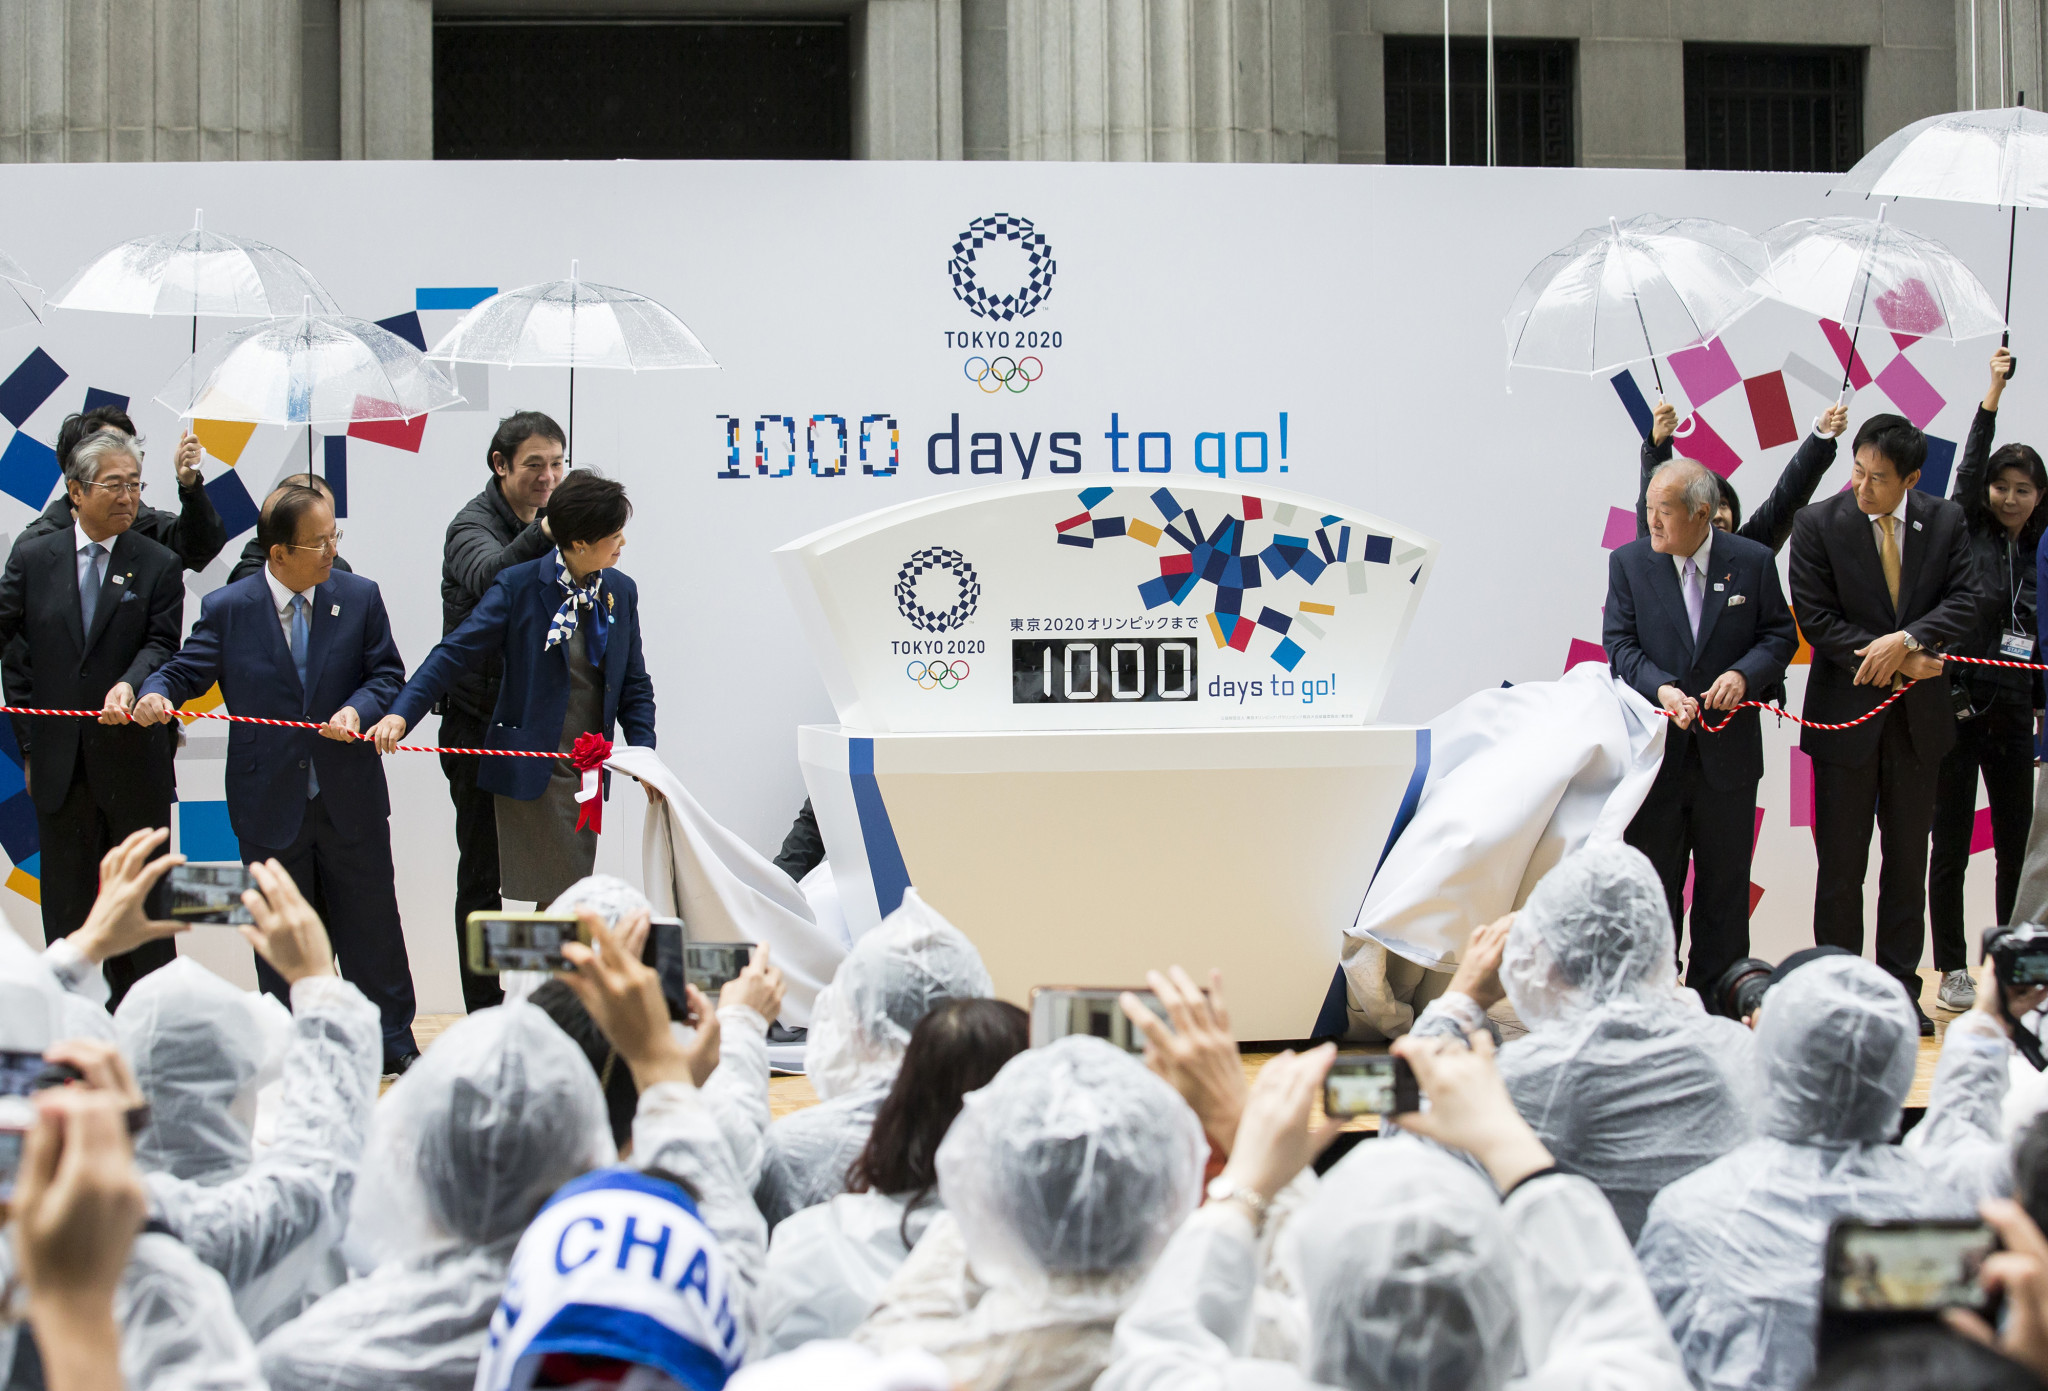 Tokyo Governor Yuriko Koike helped launch a countdown clock to mark 1,000 days until the start of the 2020 Olympic Games ©Getty Images